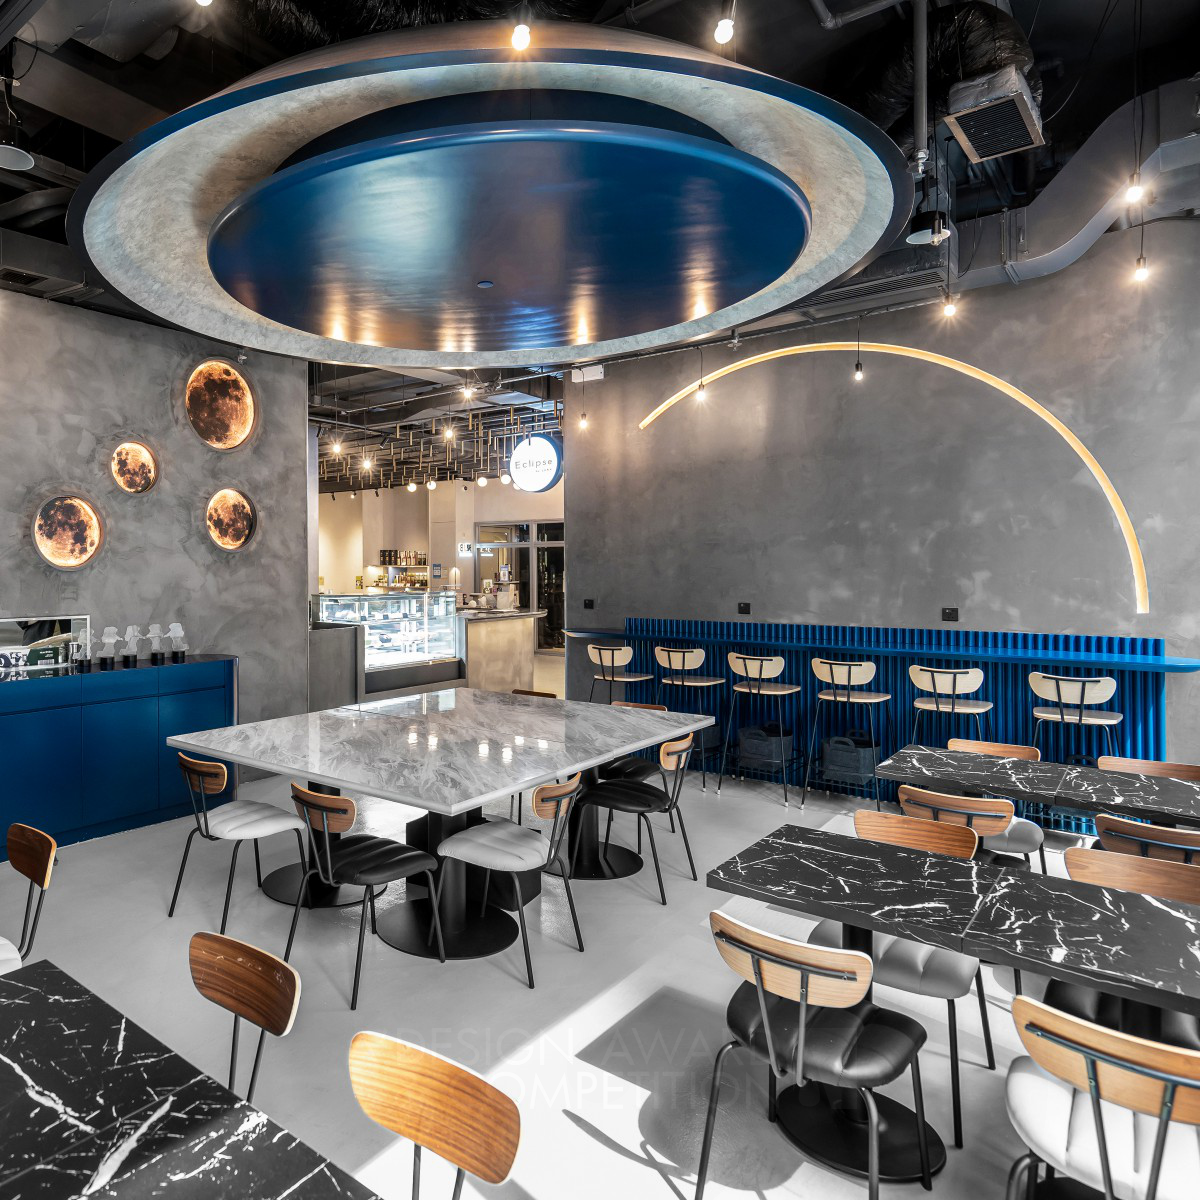 Yachi Kura Restaurant by O Interiors Limited Silver Interior Space and Exhibition Design Award Winner 2023 